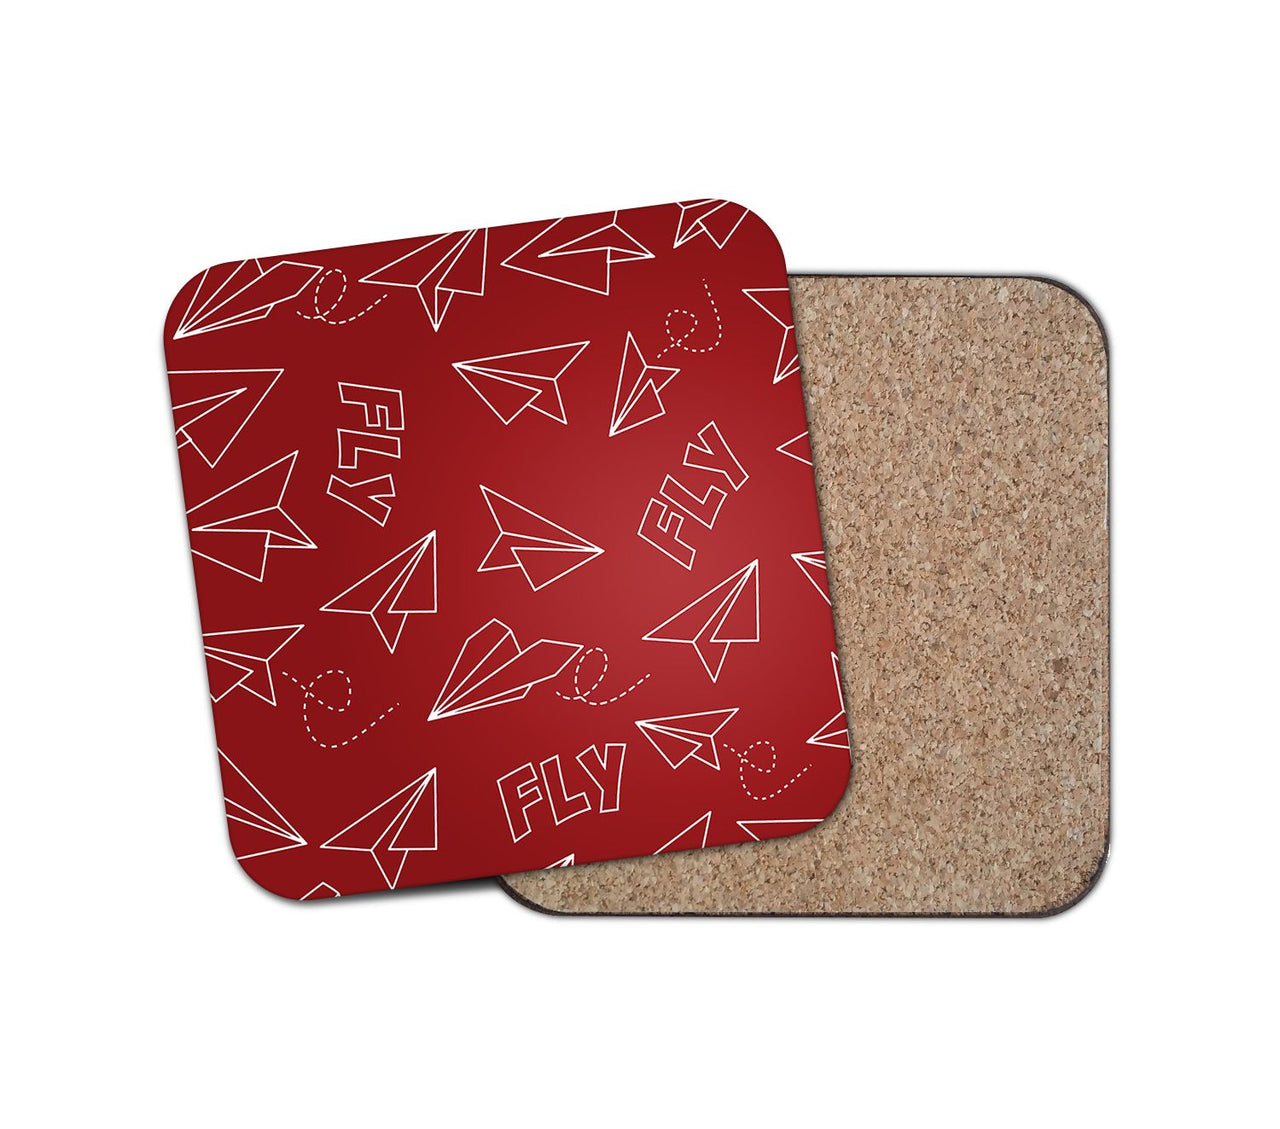 Paper Airplane & Fly (Red) Designed Coasters